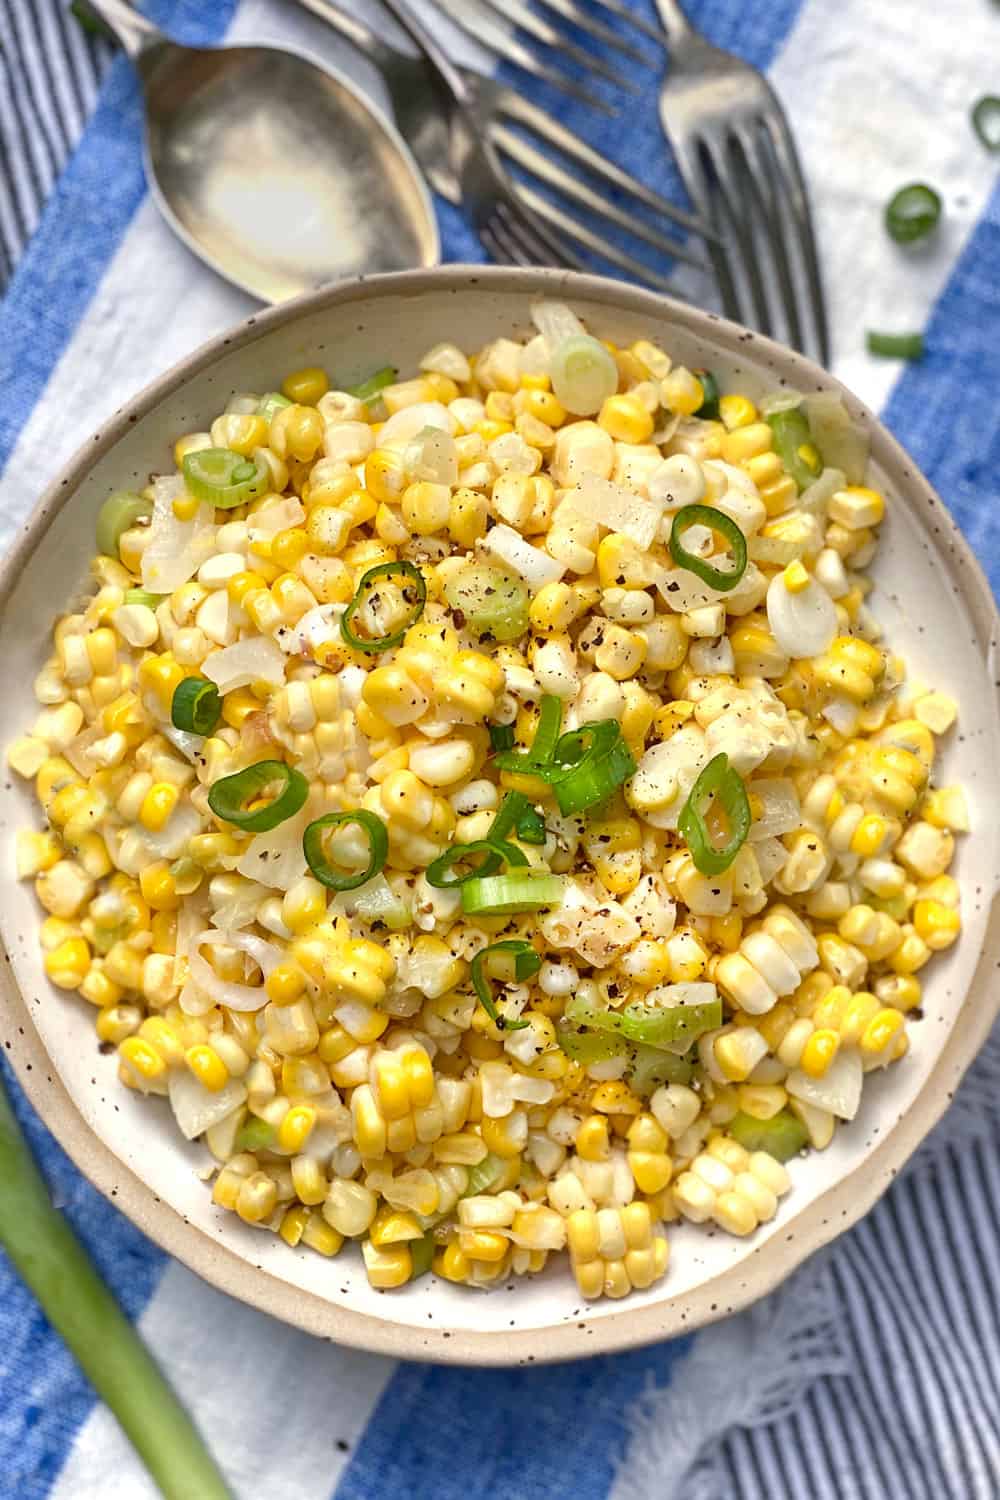 white bowl filled with sauteed corn and scallions, a blue and white striped cloth napkin underneath and several forks and a spoon on the side.